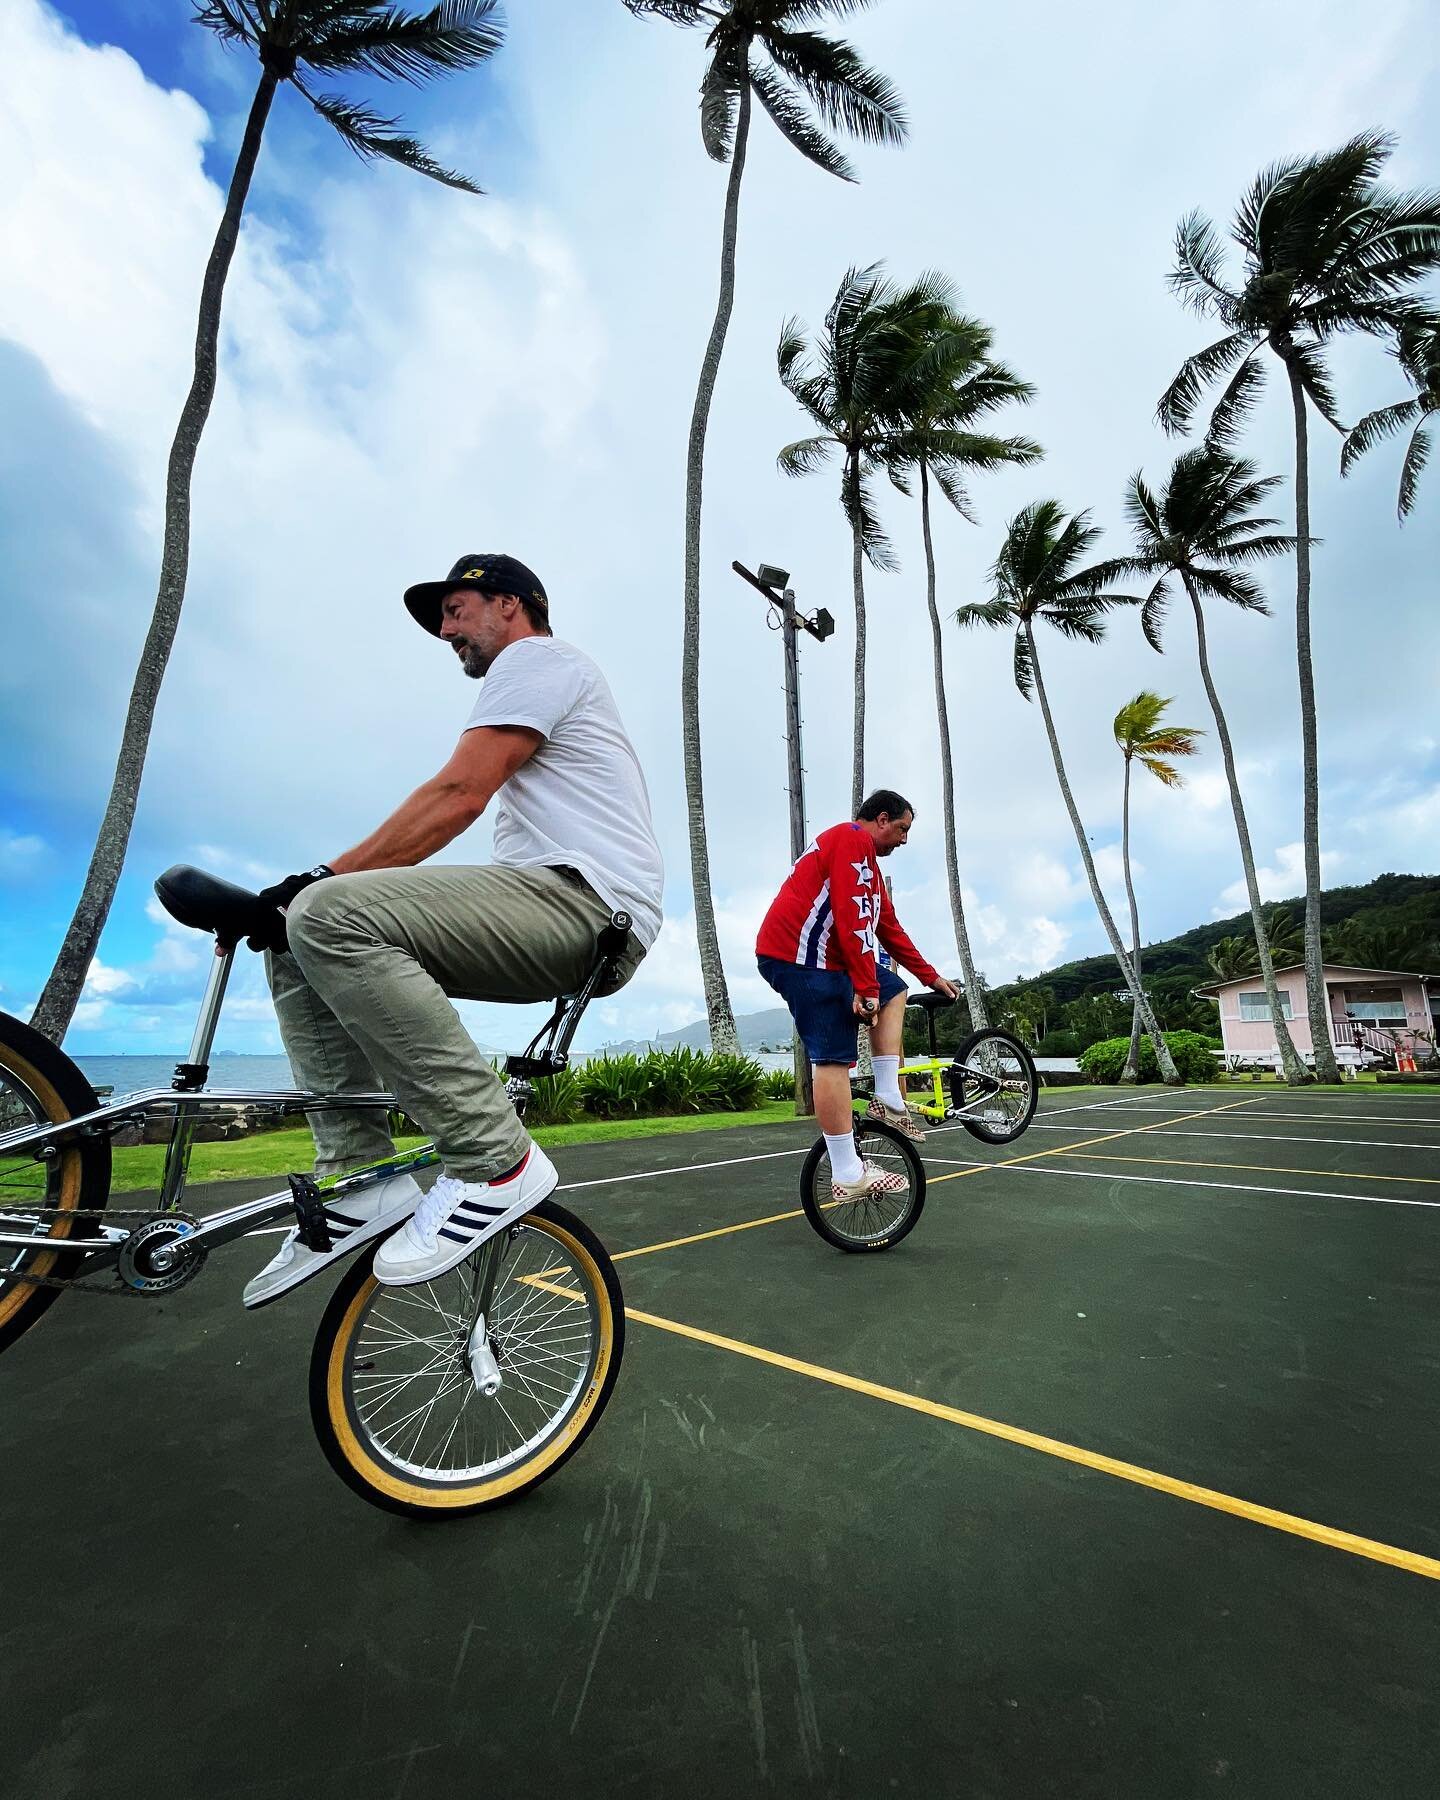 Aloha Jam 2023 &ldquo;The O&rsquo;ahu Sessions&rdquo; starts tomorrow!
DAY ONE - THURSDAY 
We take a trip to Valley of Temples in the morning then session at Laenani Park in Kaneohe. See you all there!
-
#bmx #flatland #ridehi #oahu #hawaii